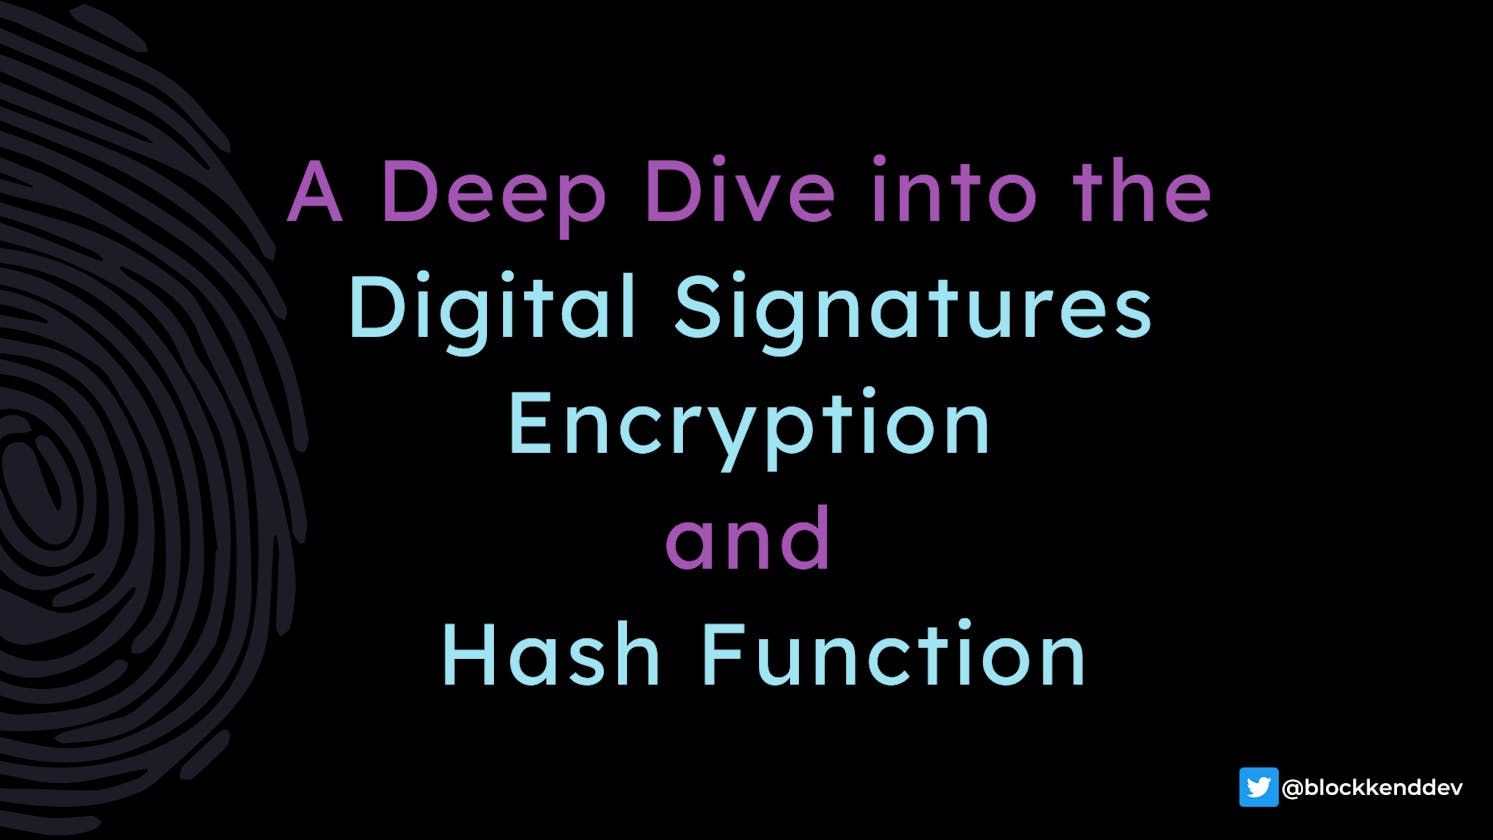 A Deep Dive into the Digital Signatures, Encryption, and Hash Function